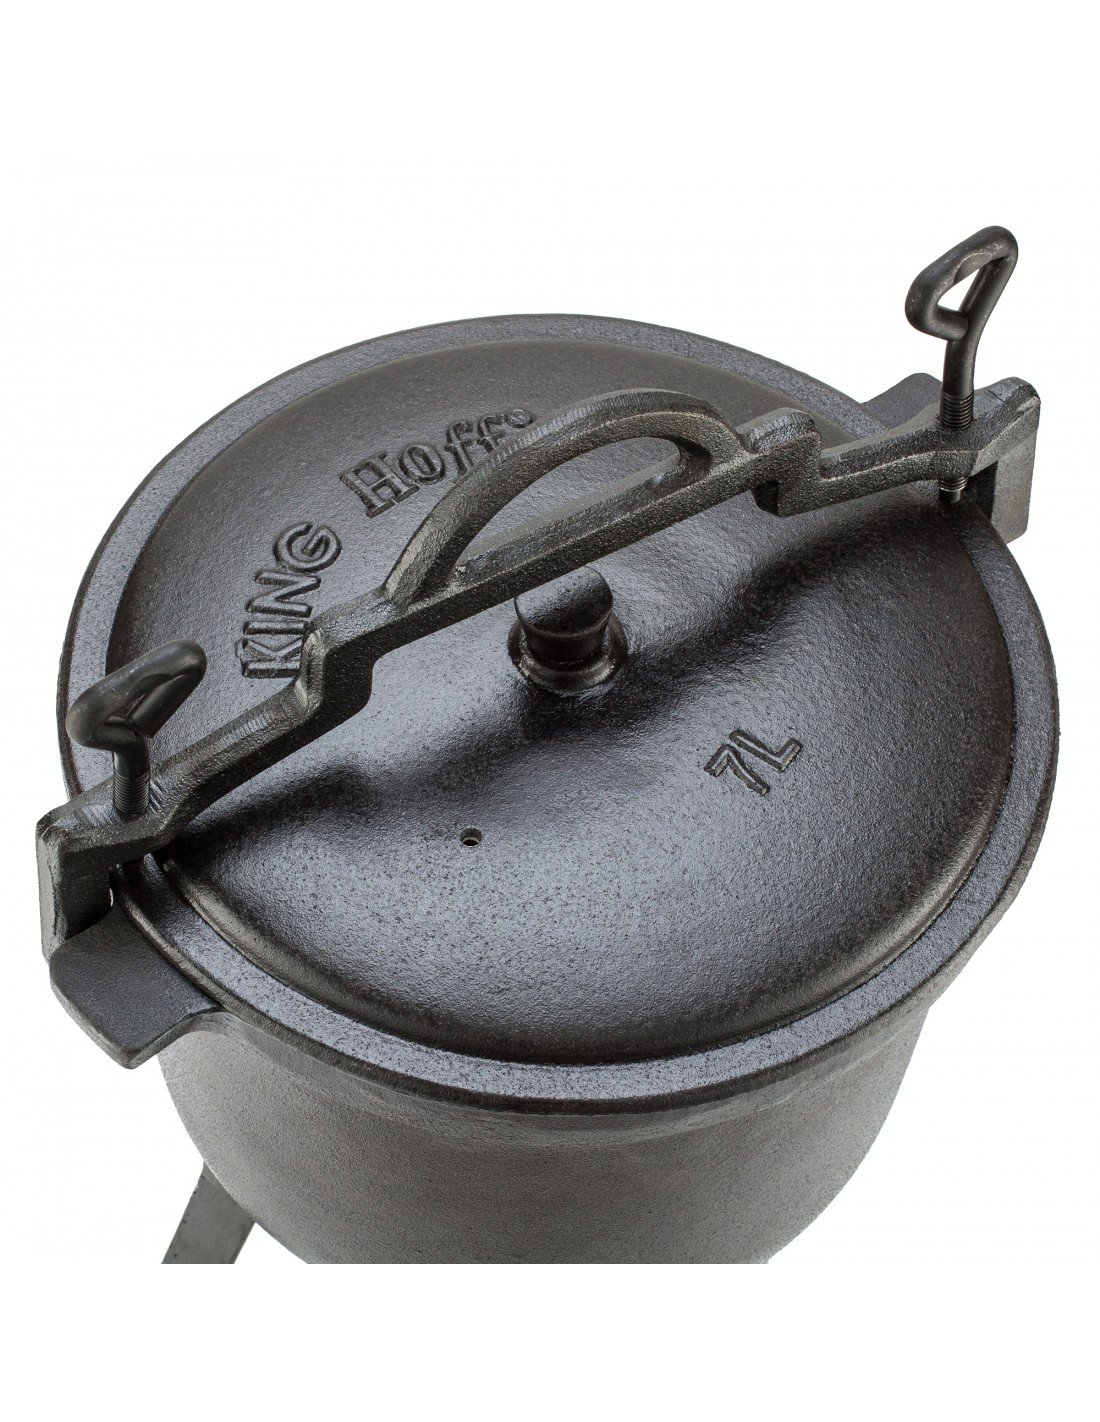 https://kinghoff.com/3316-thickbox_default/cast-iron-camping-casserole-with-enamel-coating.jpg